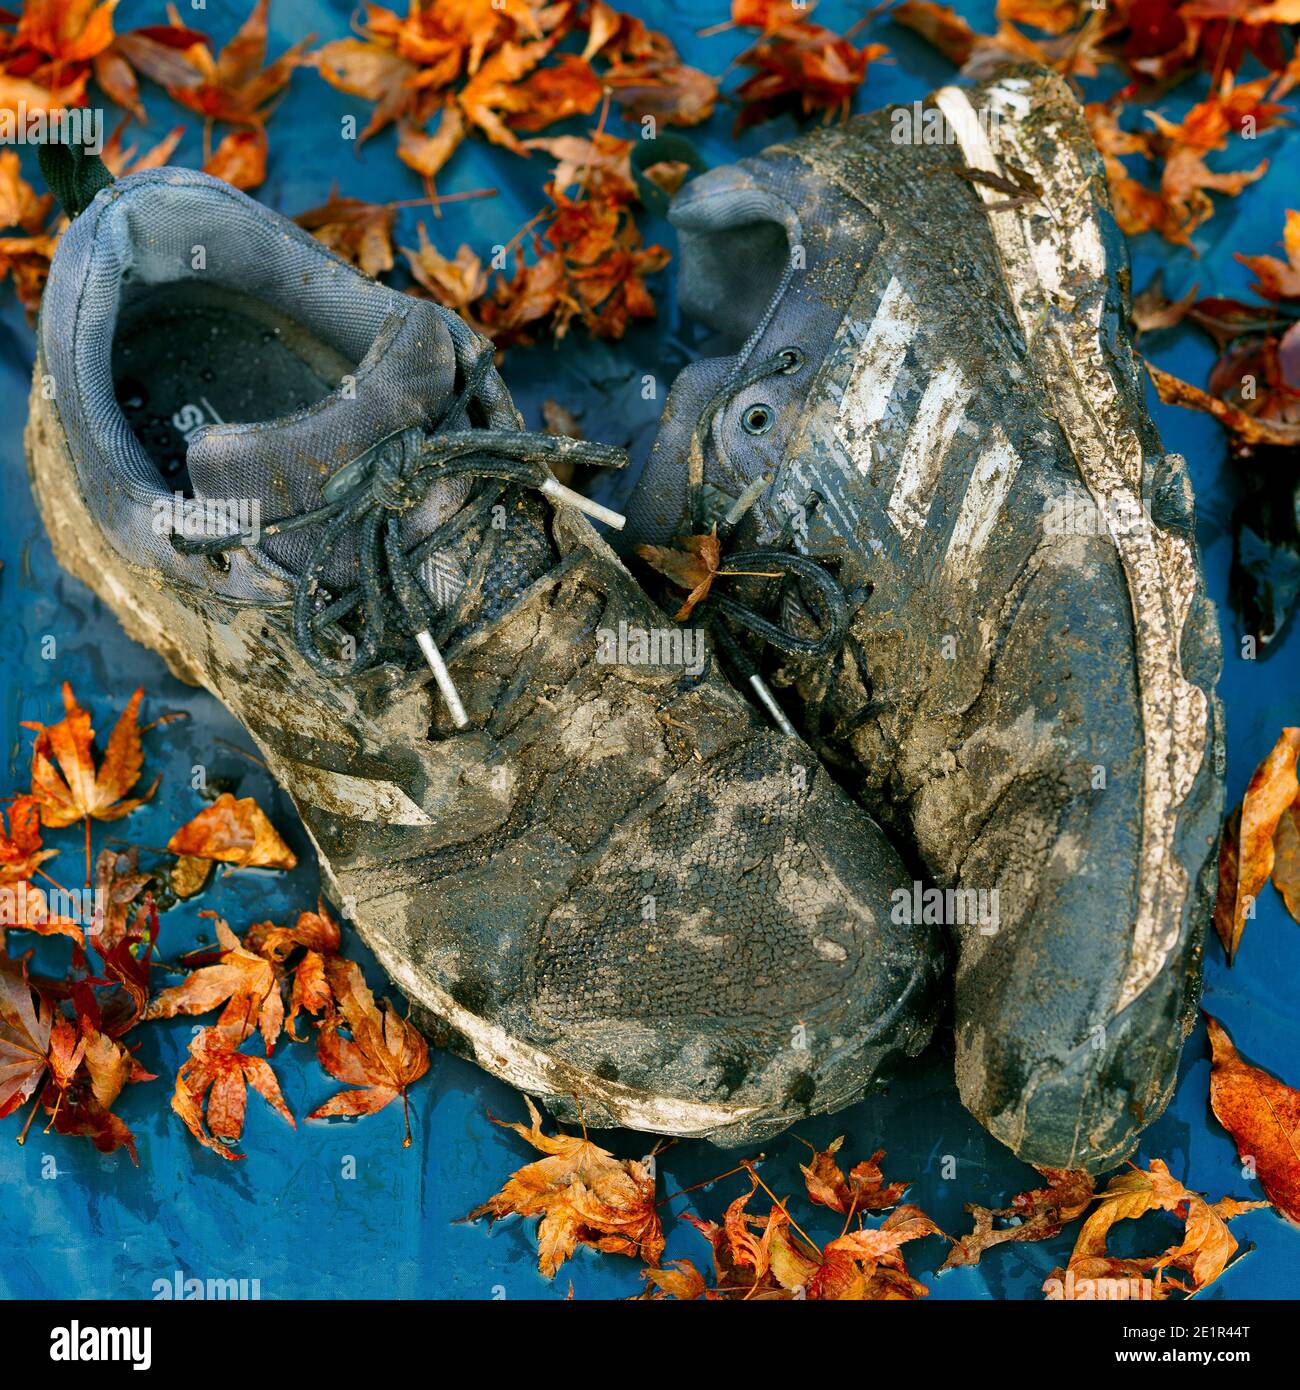 Men's Muddy Adidas Running Shoes, Dirty Adidas Training Shoes. Surrounded  by Autumn leaves. Adidas Galaxy Trail Shoes Stock Photo - Alamy